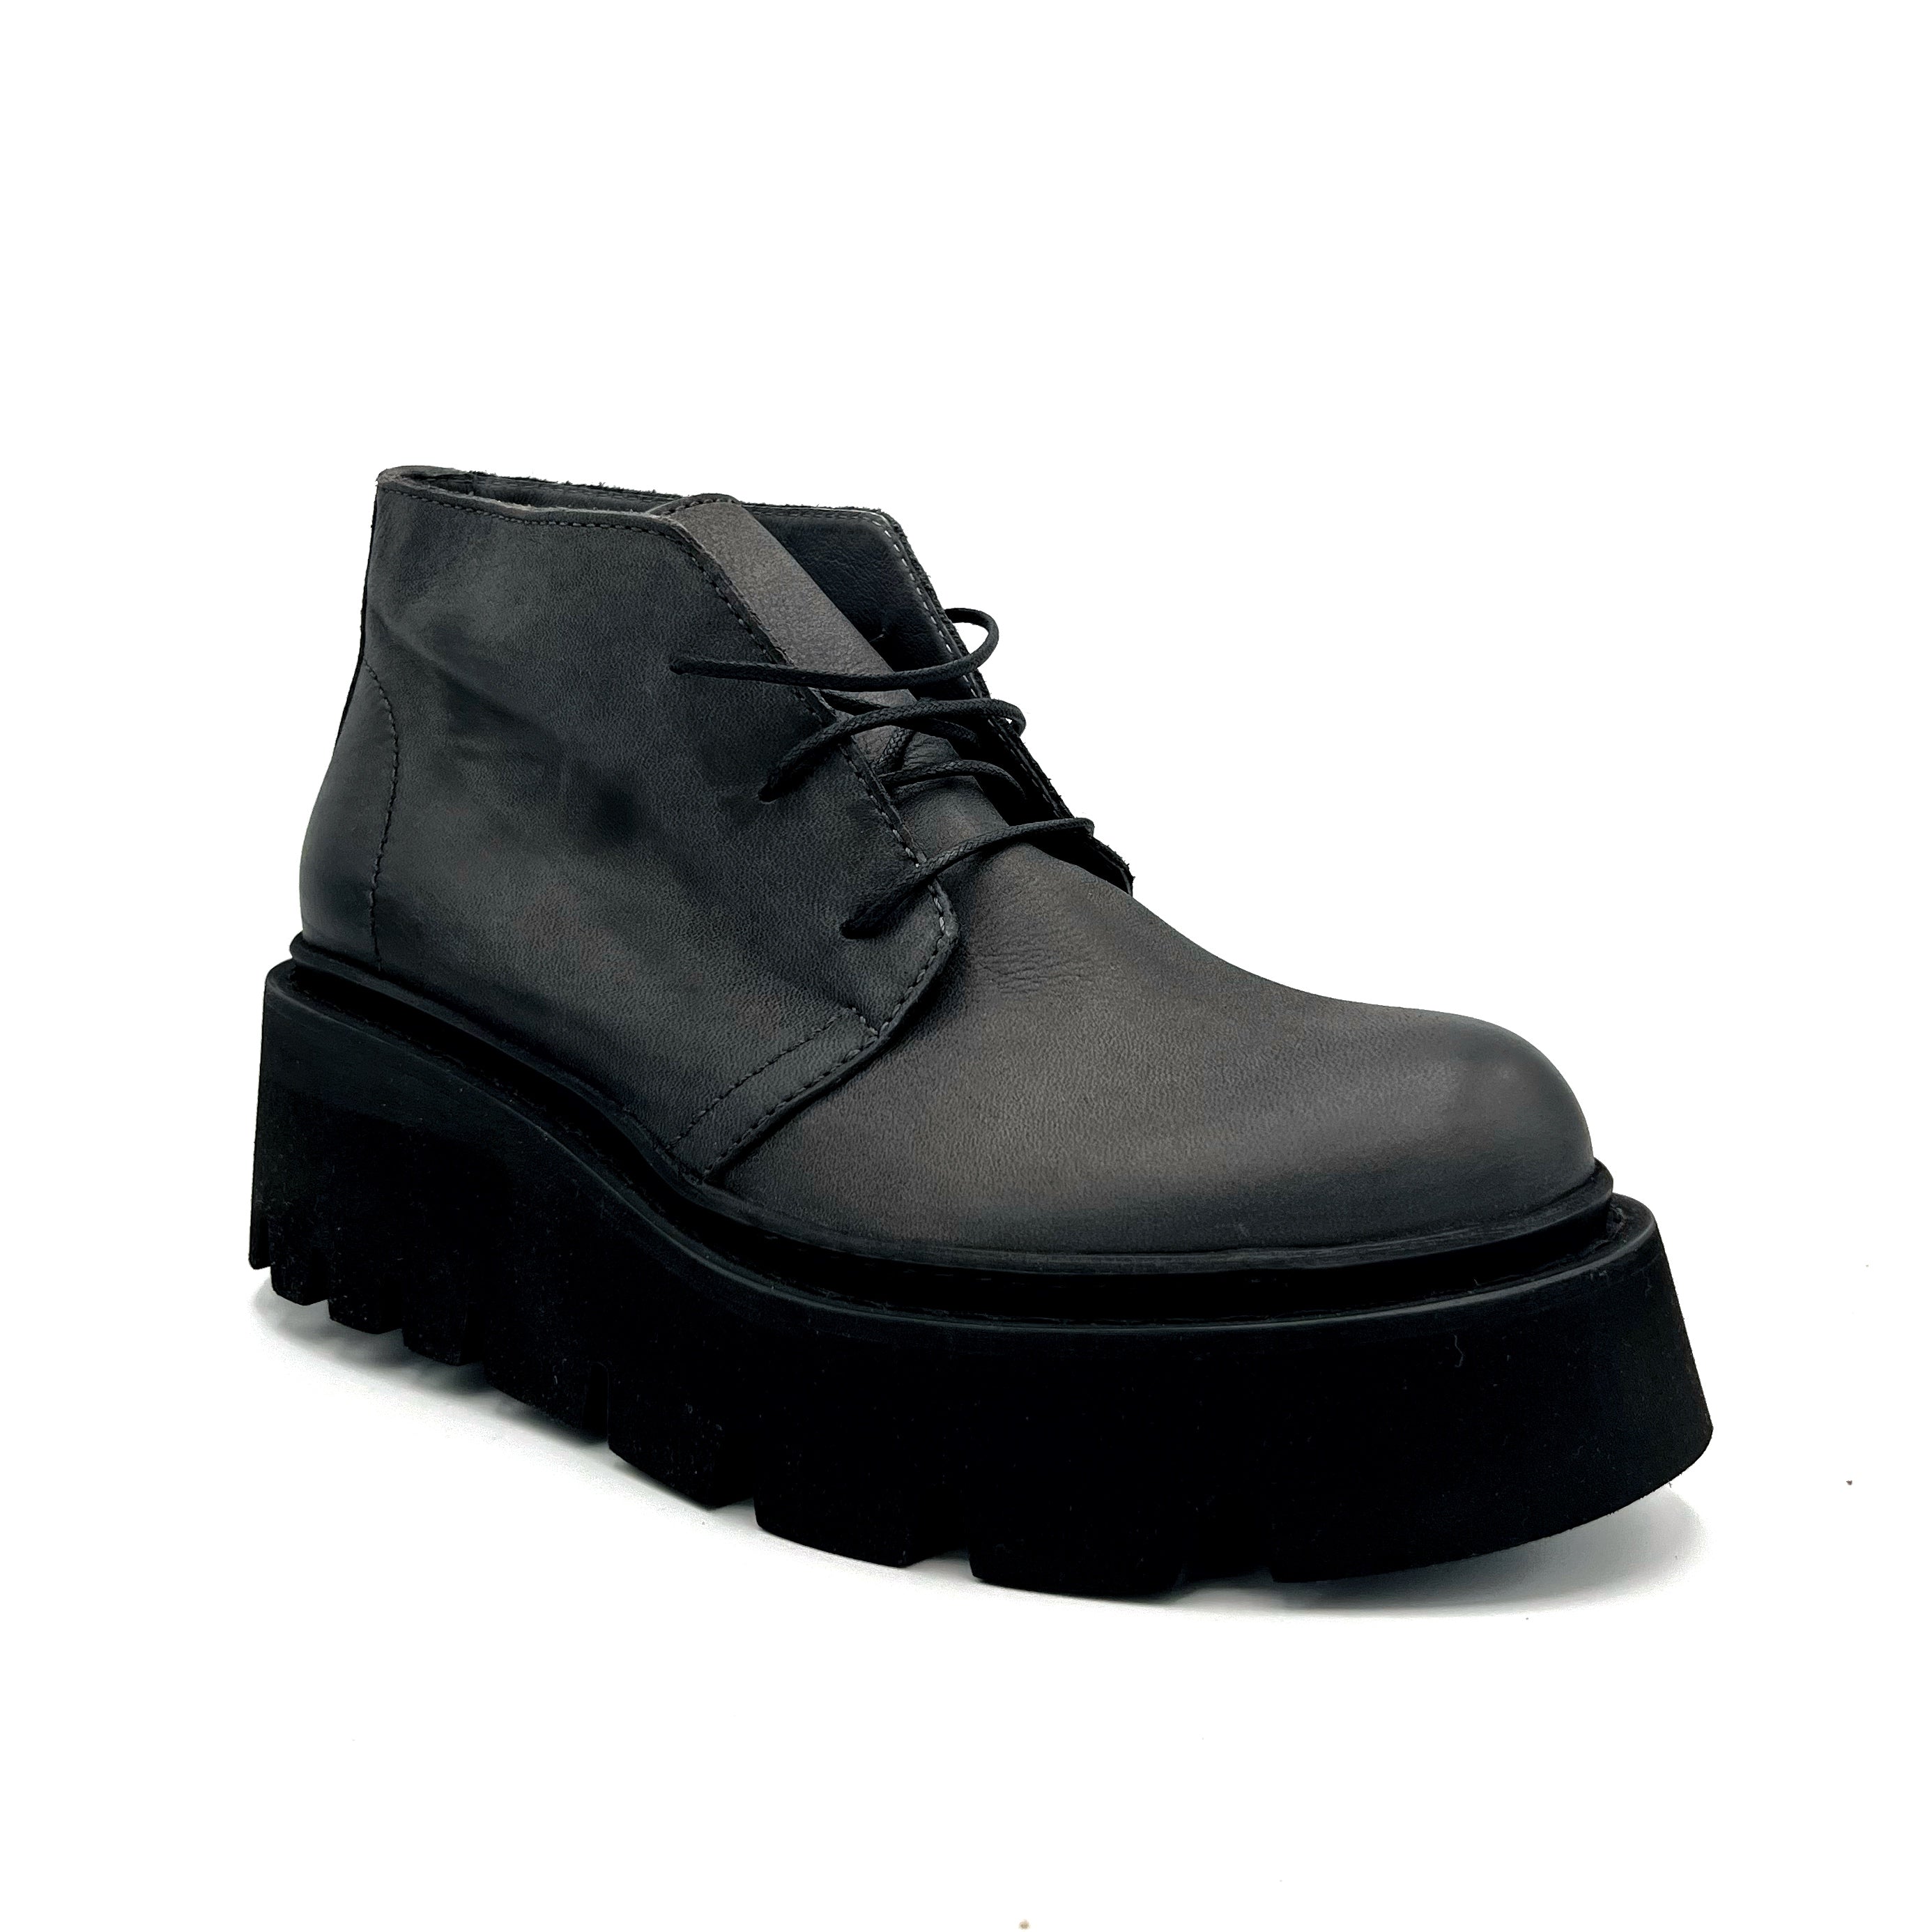 Outer front side view of the Lofina 4366 Londra Bootie.